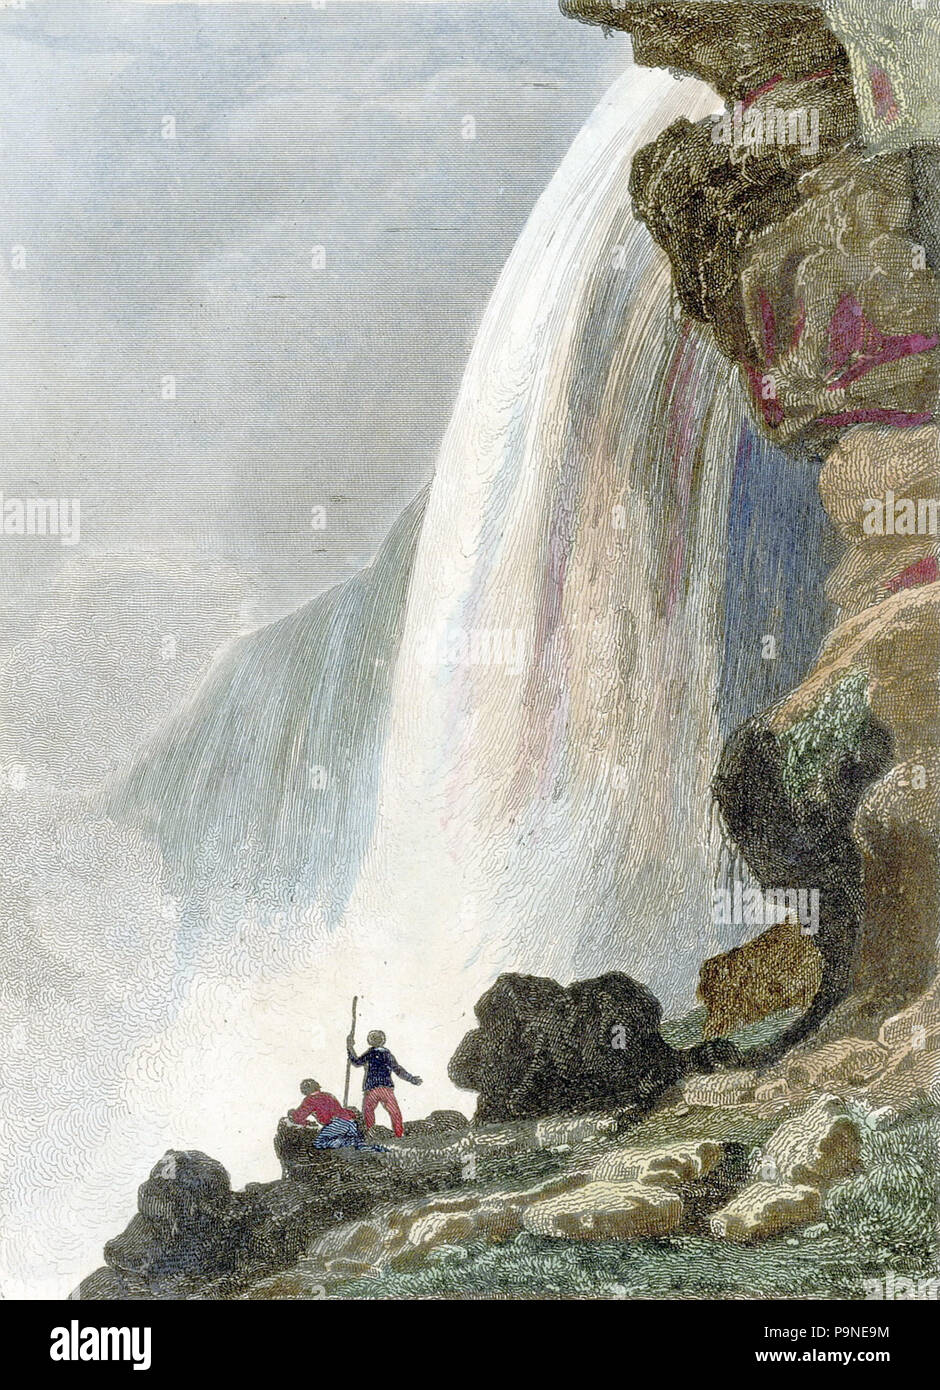 . English: Print from steel engraving titled Voute sous la Chute du Niagara - Niagara Falls - from 1st edition of Jean-Baptiste-Gaspard Roux de Rochelle's Etats-Unis d'Amérique. Paris: Firmin Didot Freres, [1837], approx. page size 14 x 22 cm, approx. image size 9 x 14 cm. Hand coloring, drawn by Jacques-Hippolyte van der Burch, engraved by Chollet. From a set of illustrations for Roux de Rochelle's work on the United States. Roux de Rochelle, the French Minister to the U.S., included this volume in a large series entitled L'Univers. The American volume included 96 images of the United States  Stock Photo